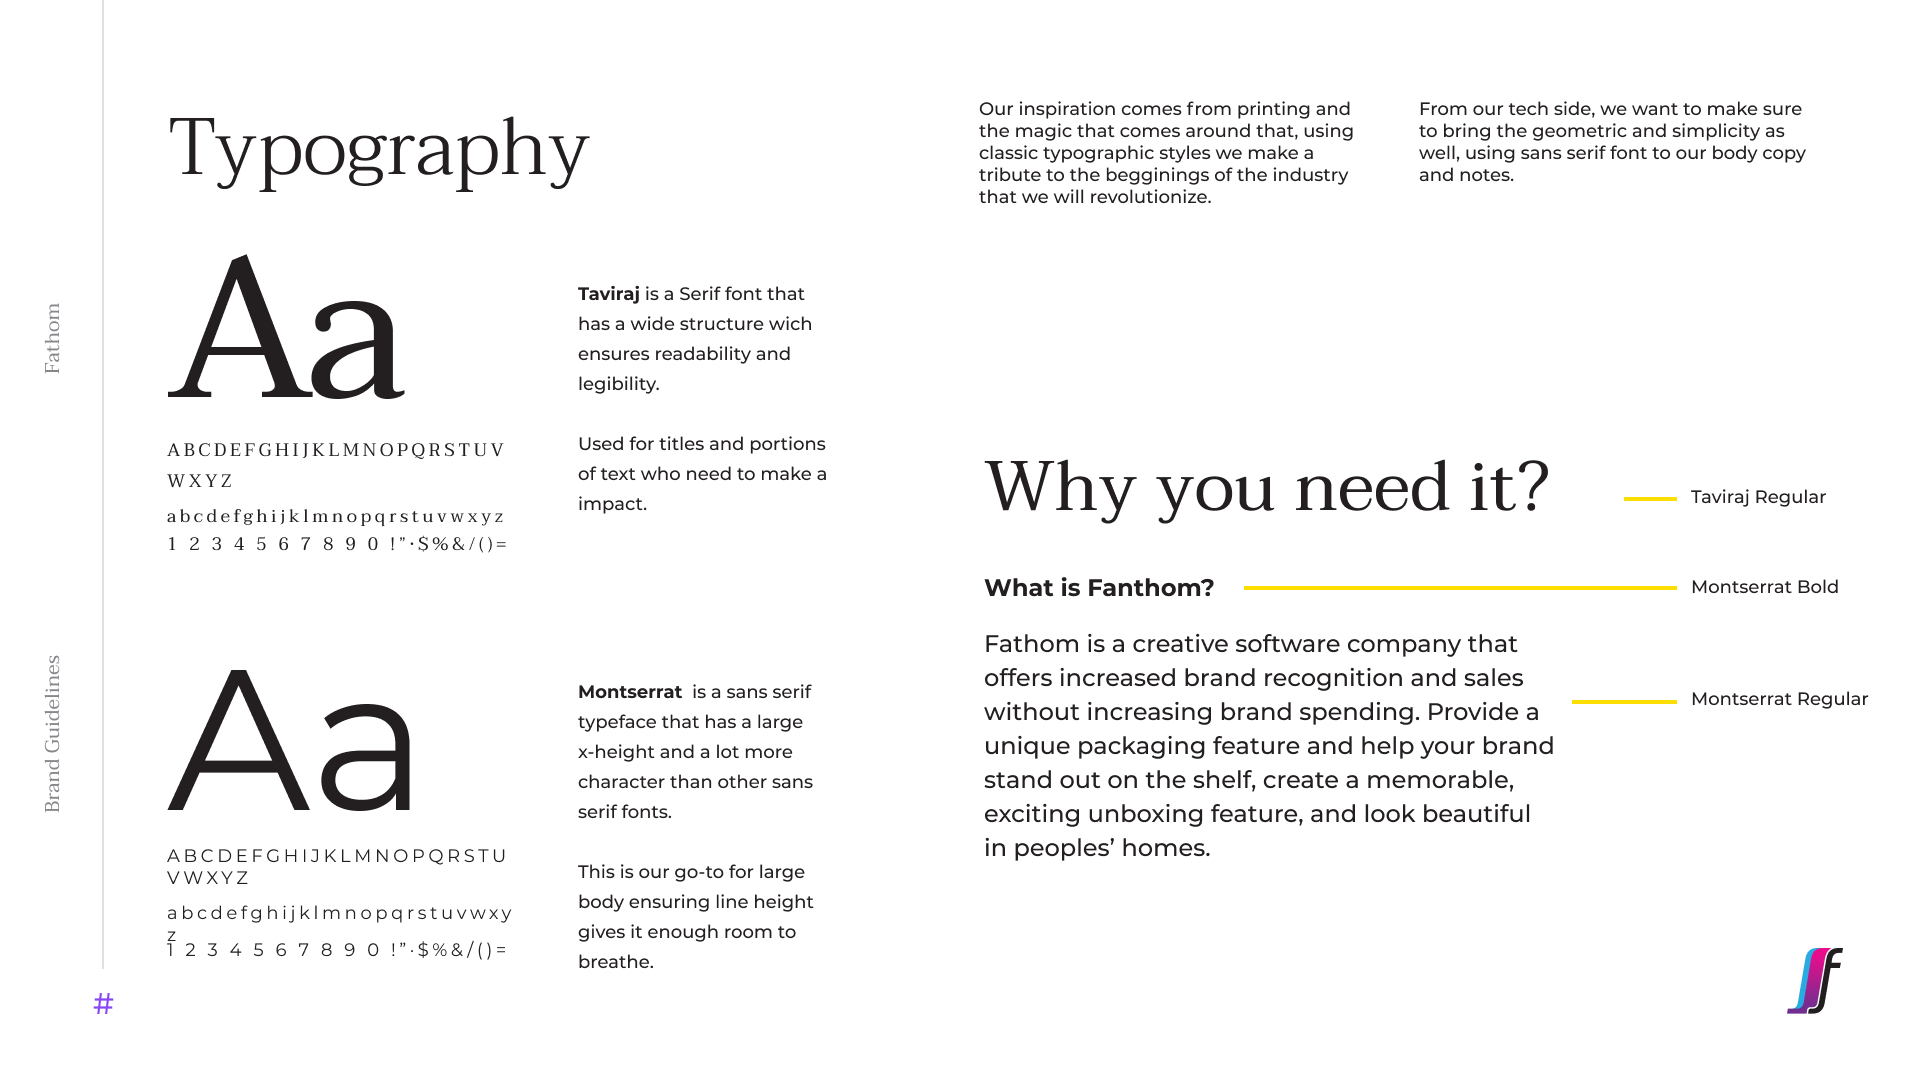 Image showing the typefaces and fonts that we used in this project.